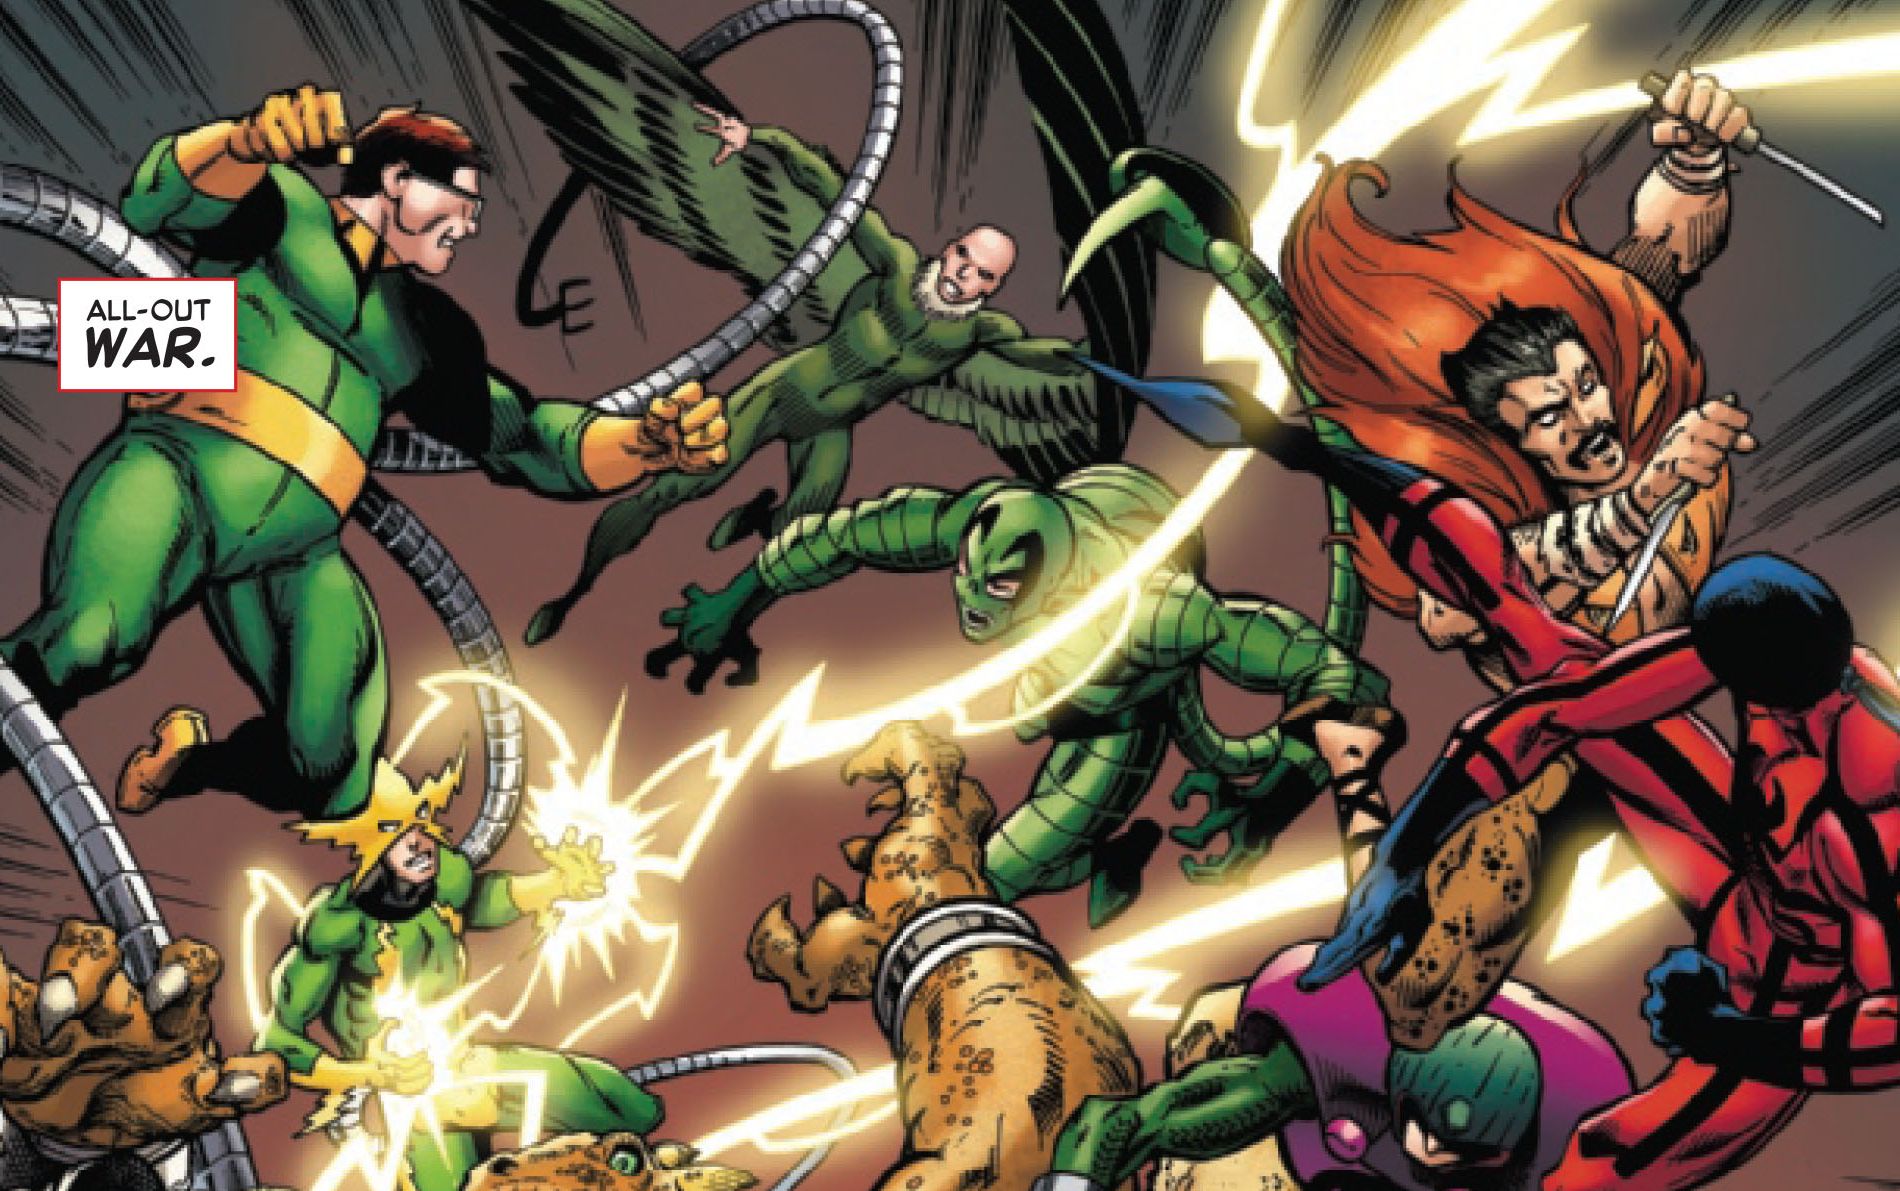 The Savage Six and the Sinister Six fight each other